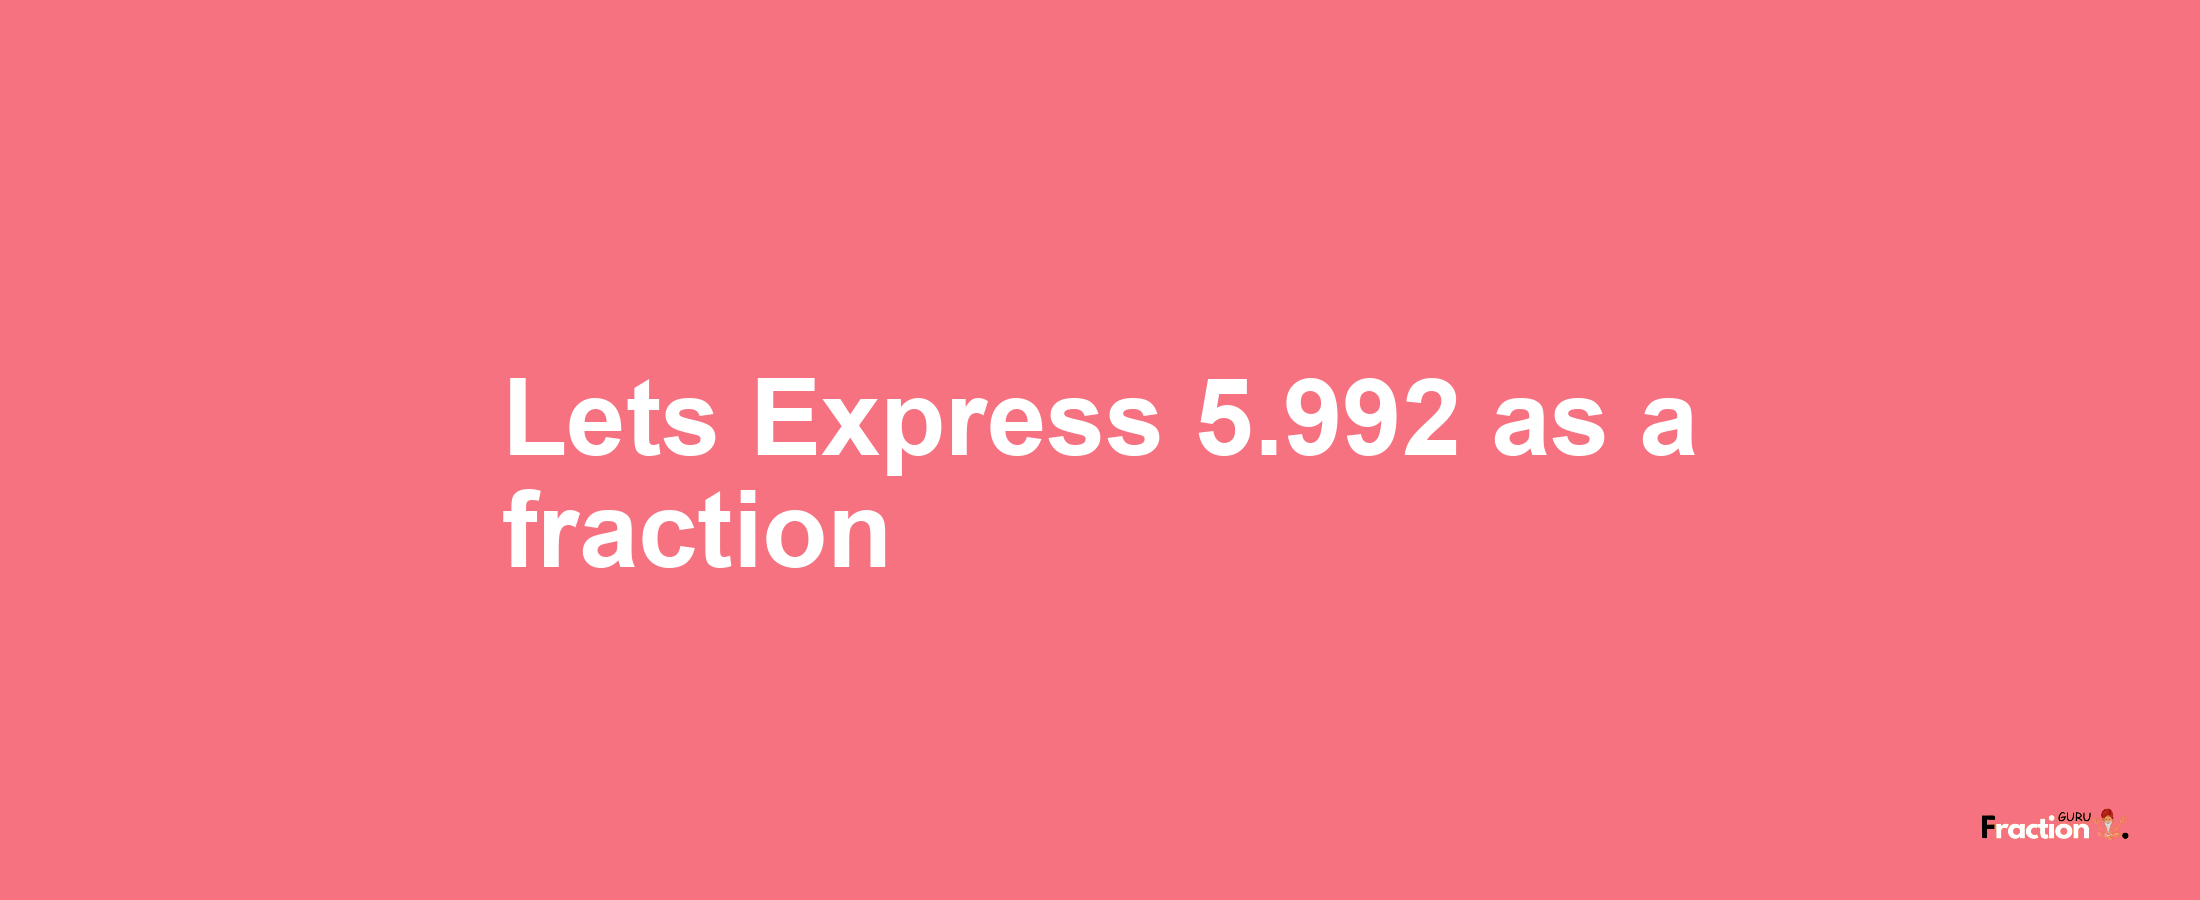 Lets Express 5.992 as afraction